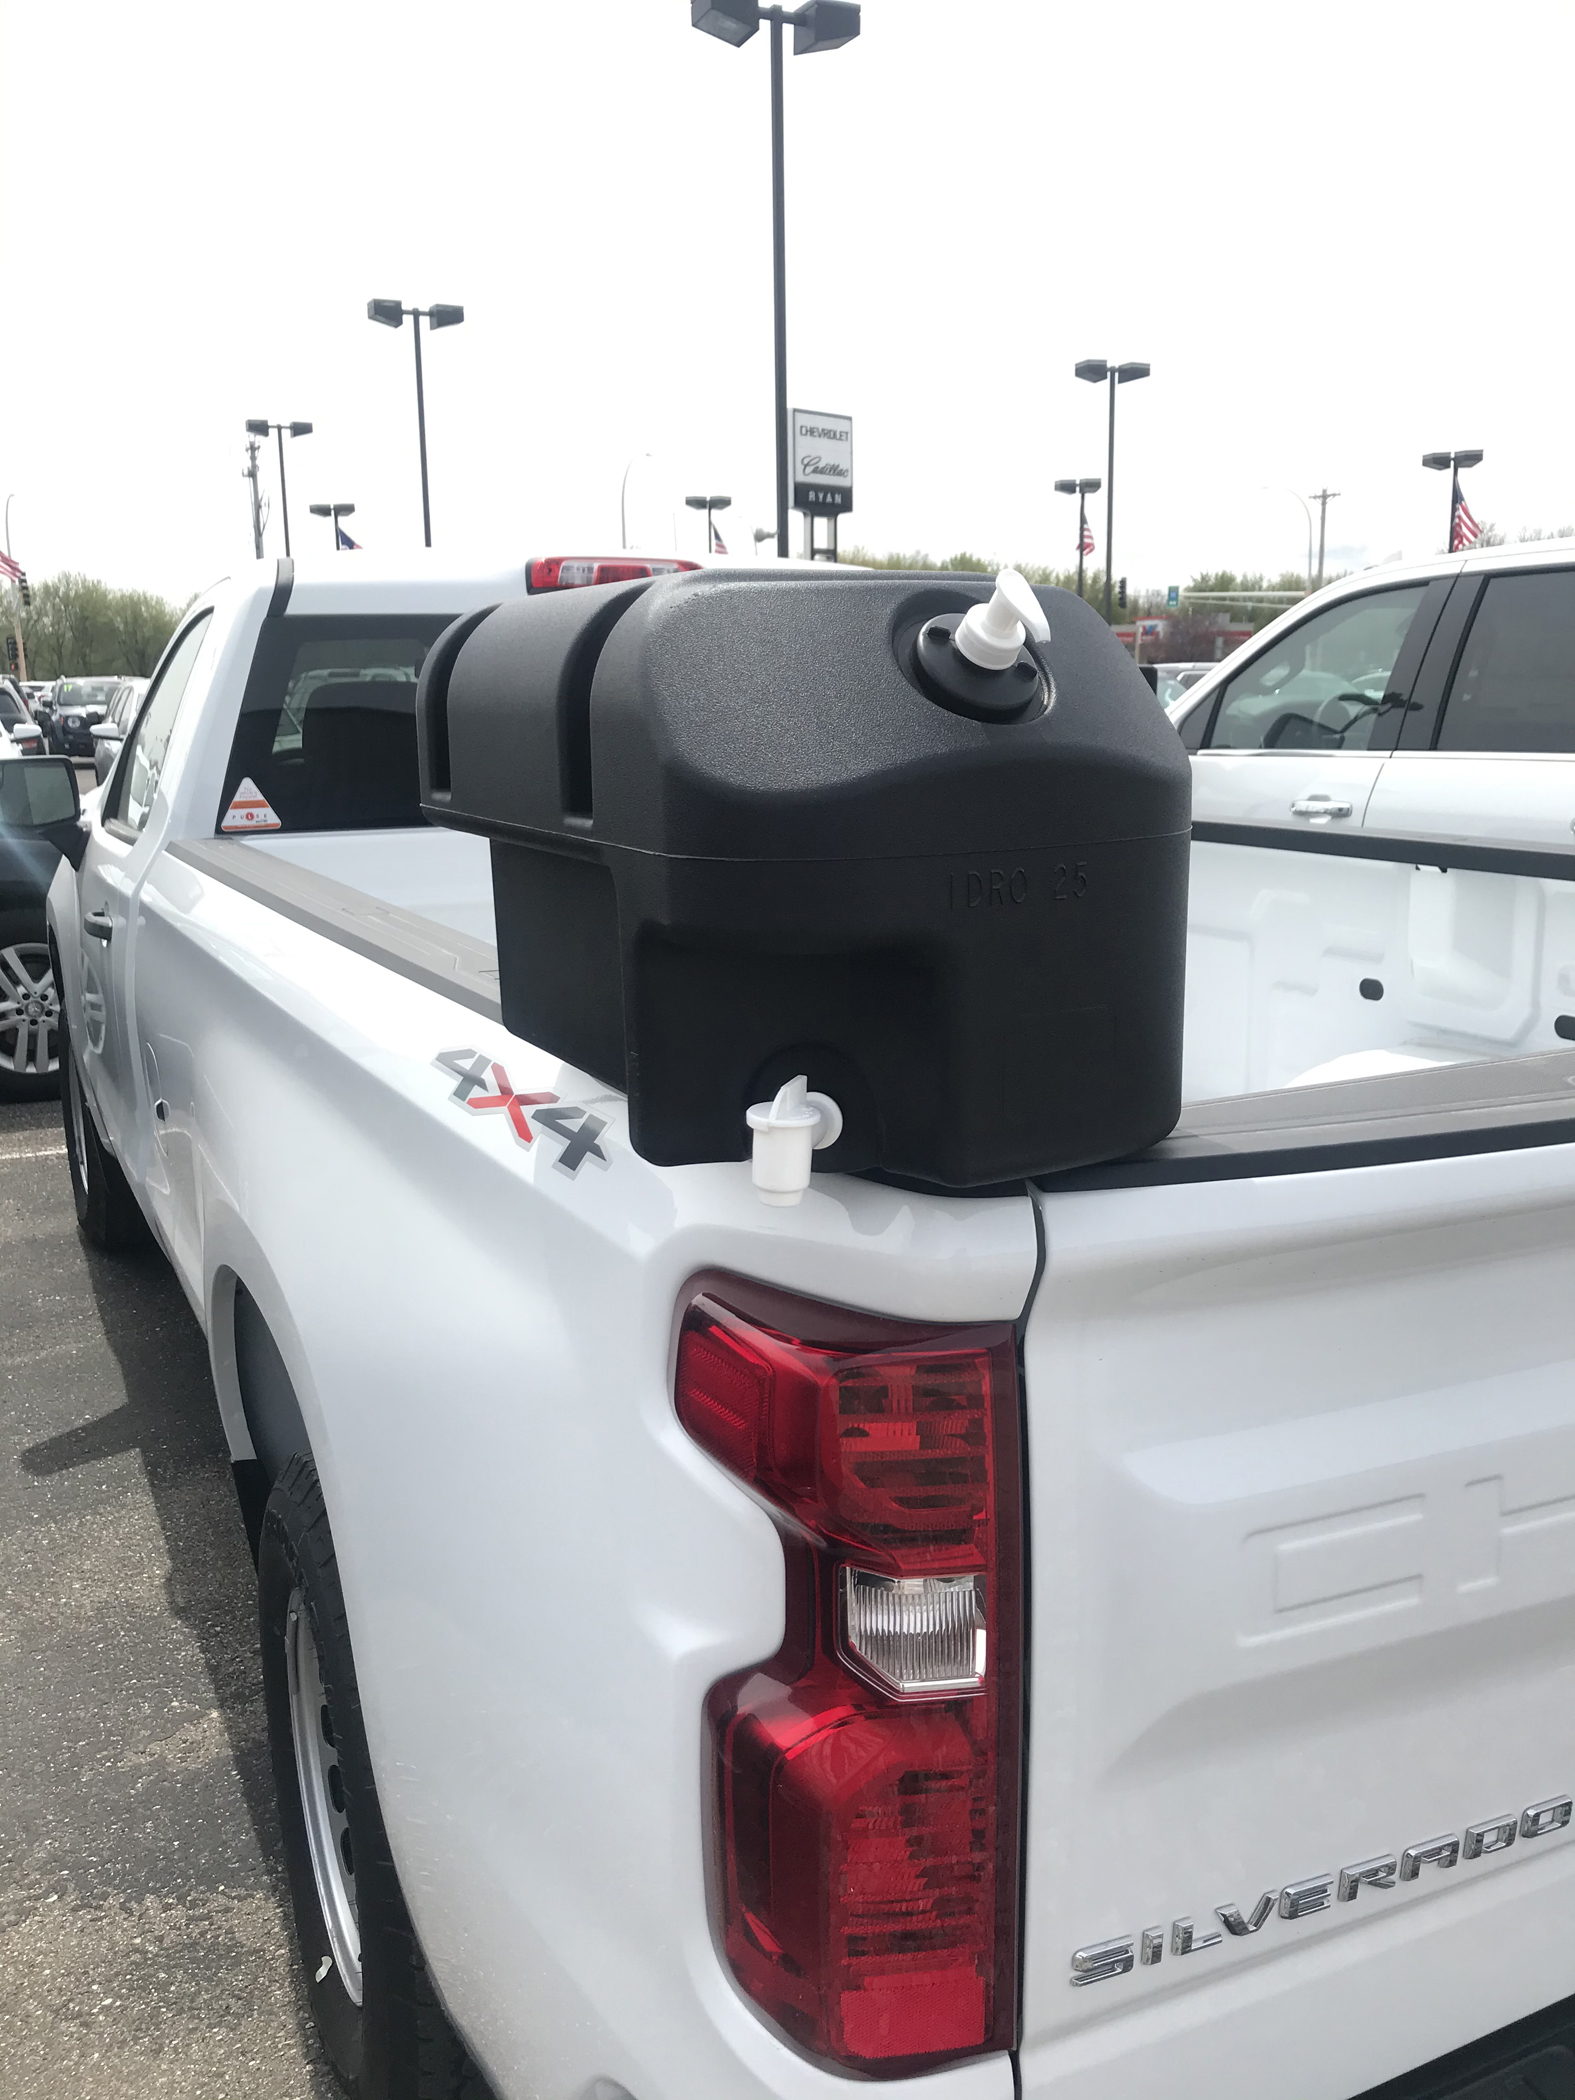 Units are compatible with virtually any type of truck, including heavy-, medium- and light-duty pickups, work trucks, box vans, ag and construction equipment, trailers and more.